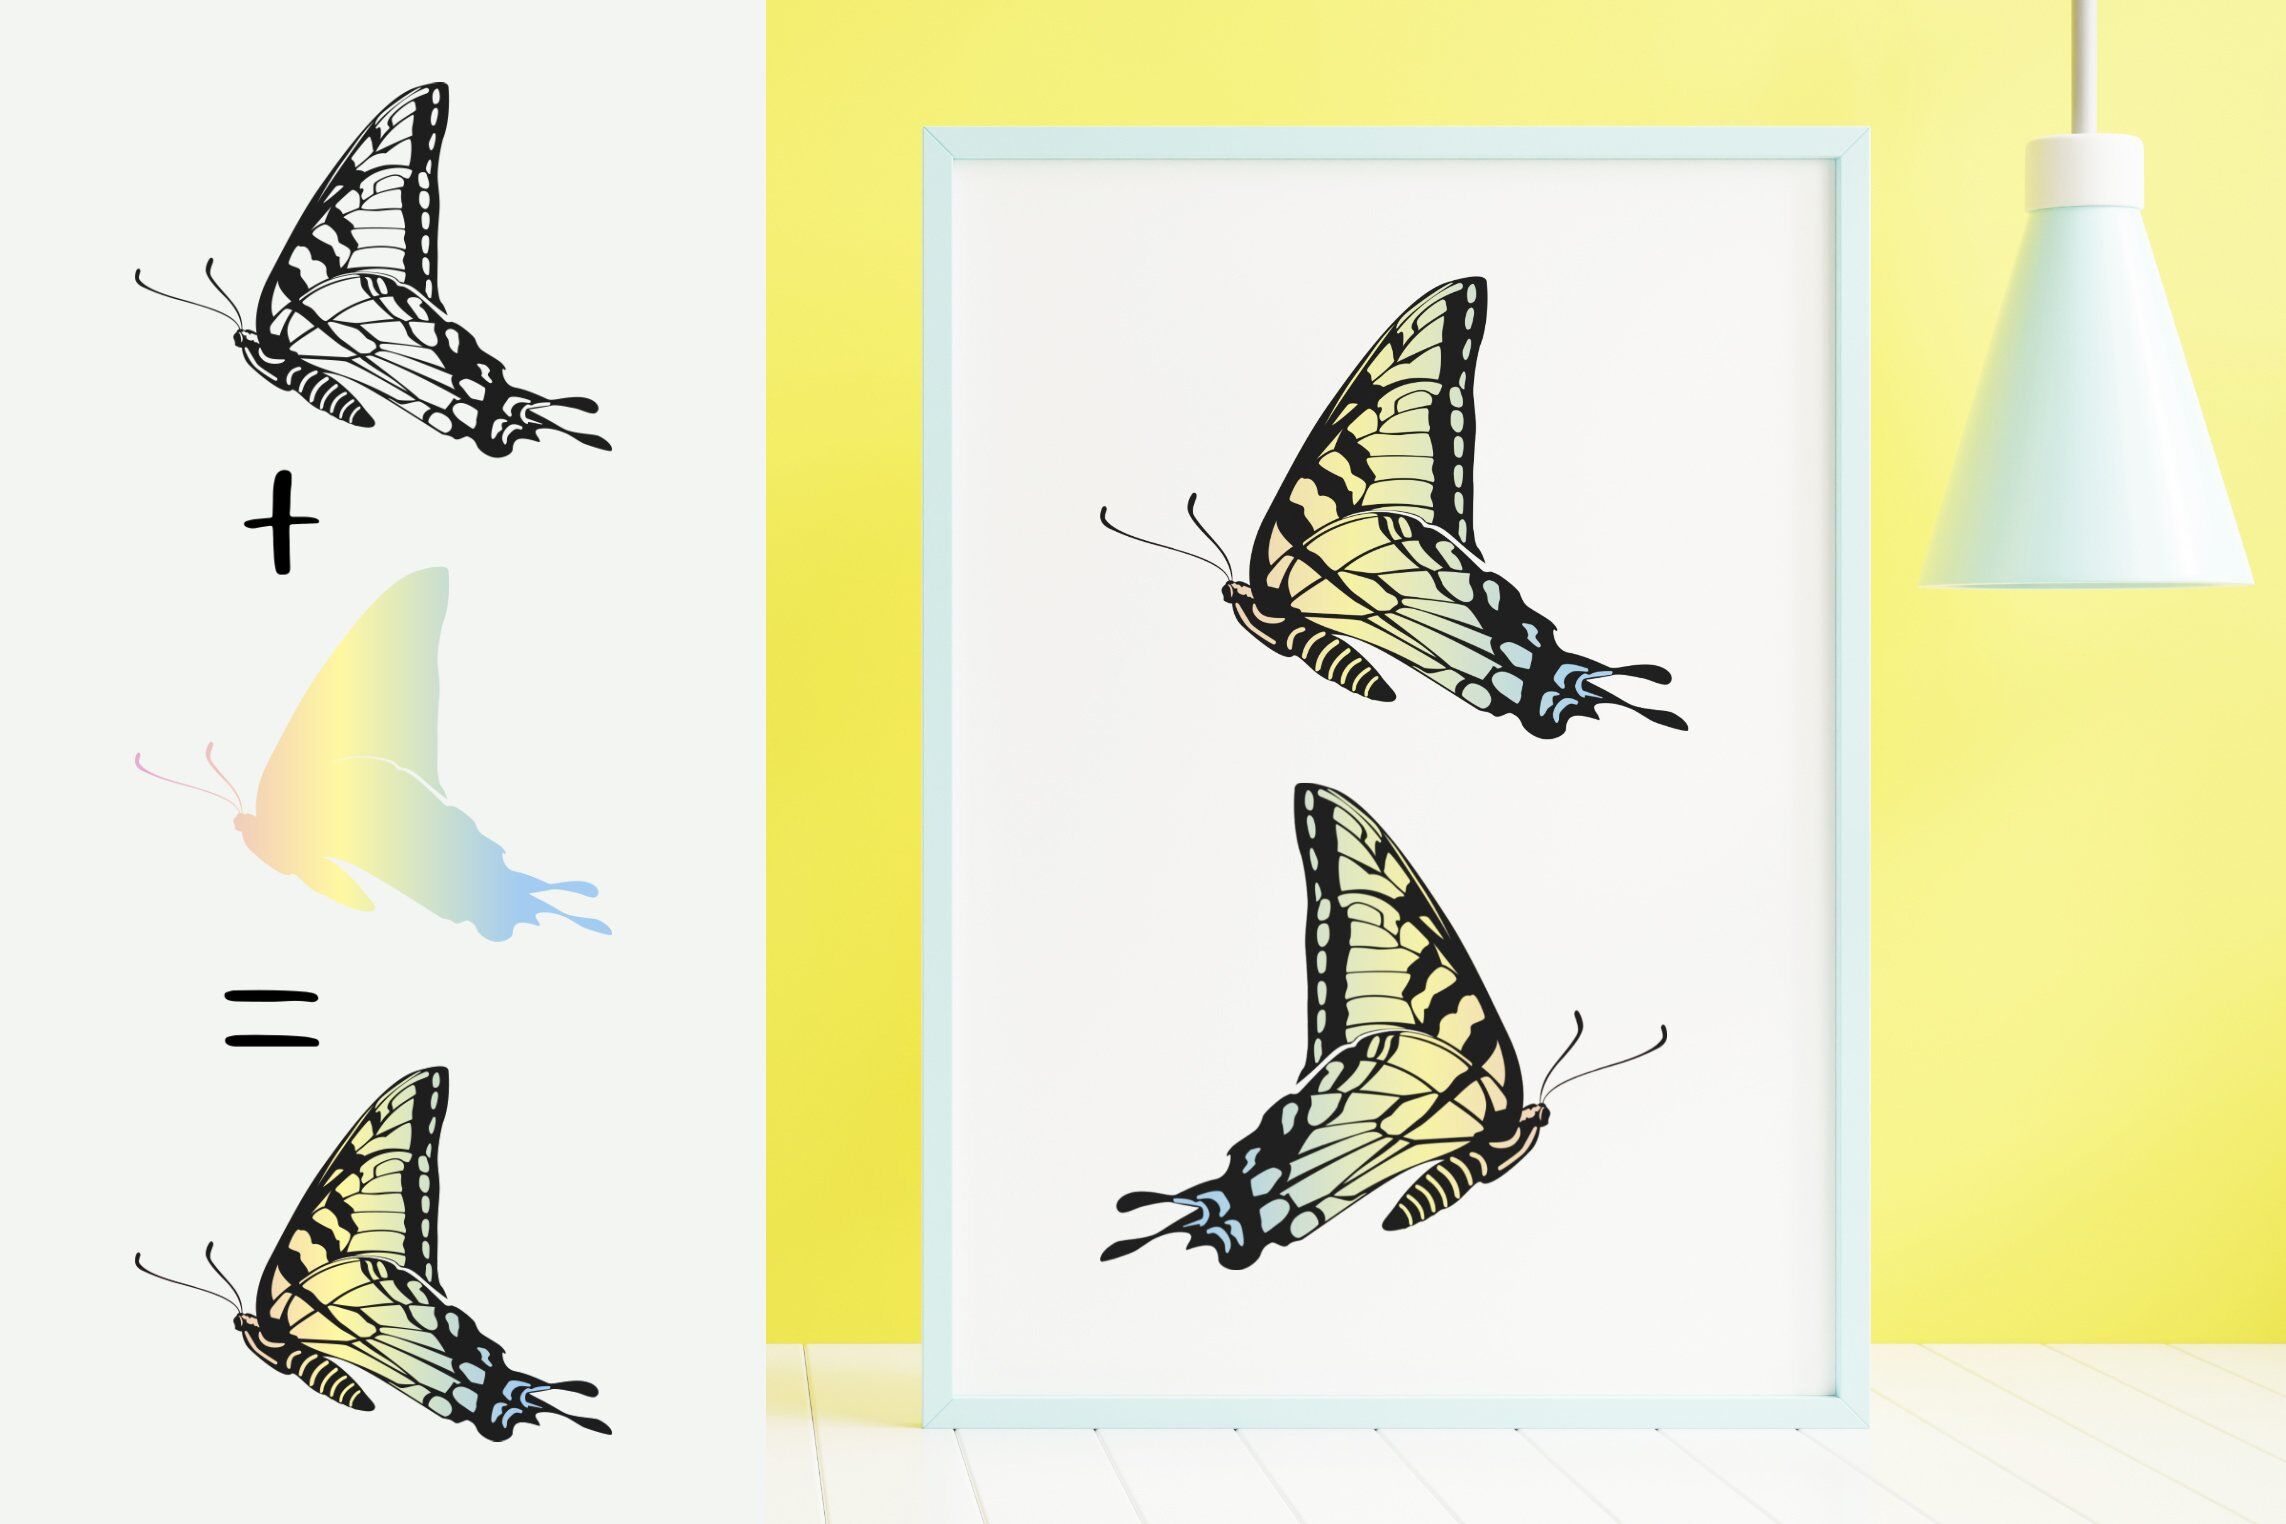 Download Layered Butterfly Svg Bundle Monarch Butterfly Png By Pretty Meerkat Thehungryjpeg Com